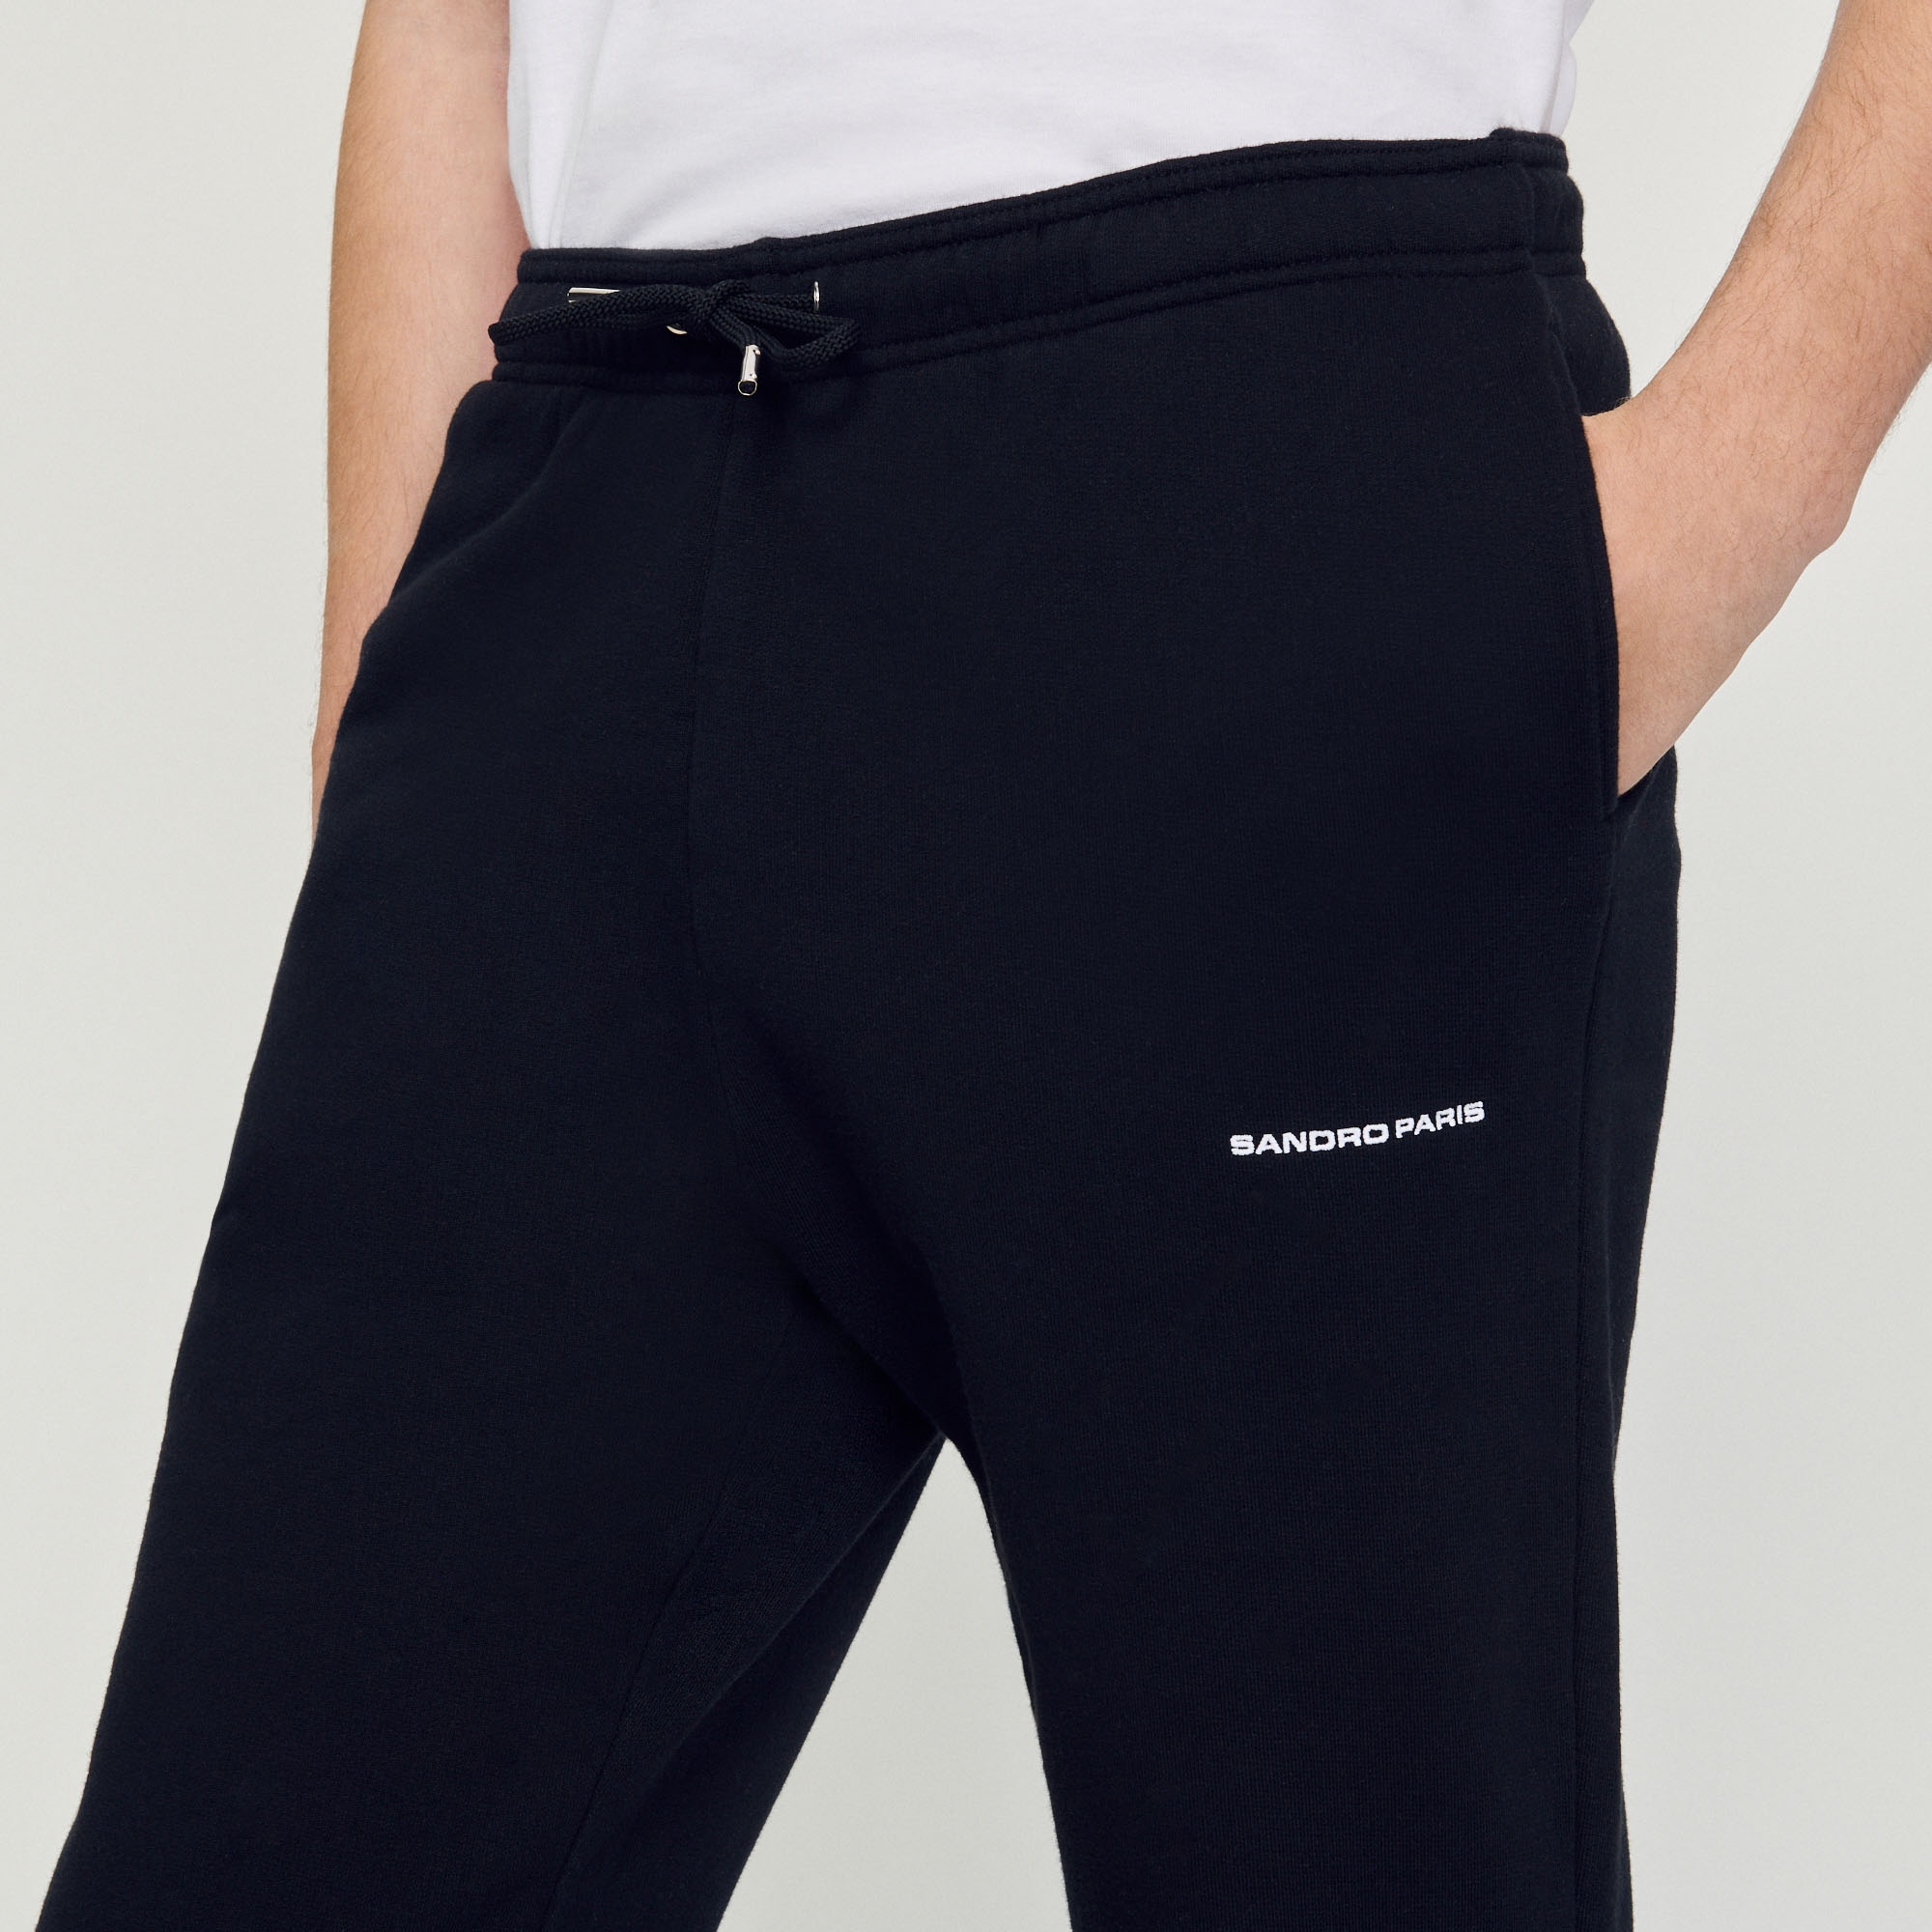 Joggers with Sandro Paris embroidery - 4